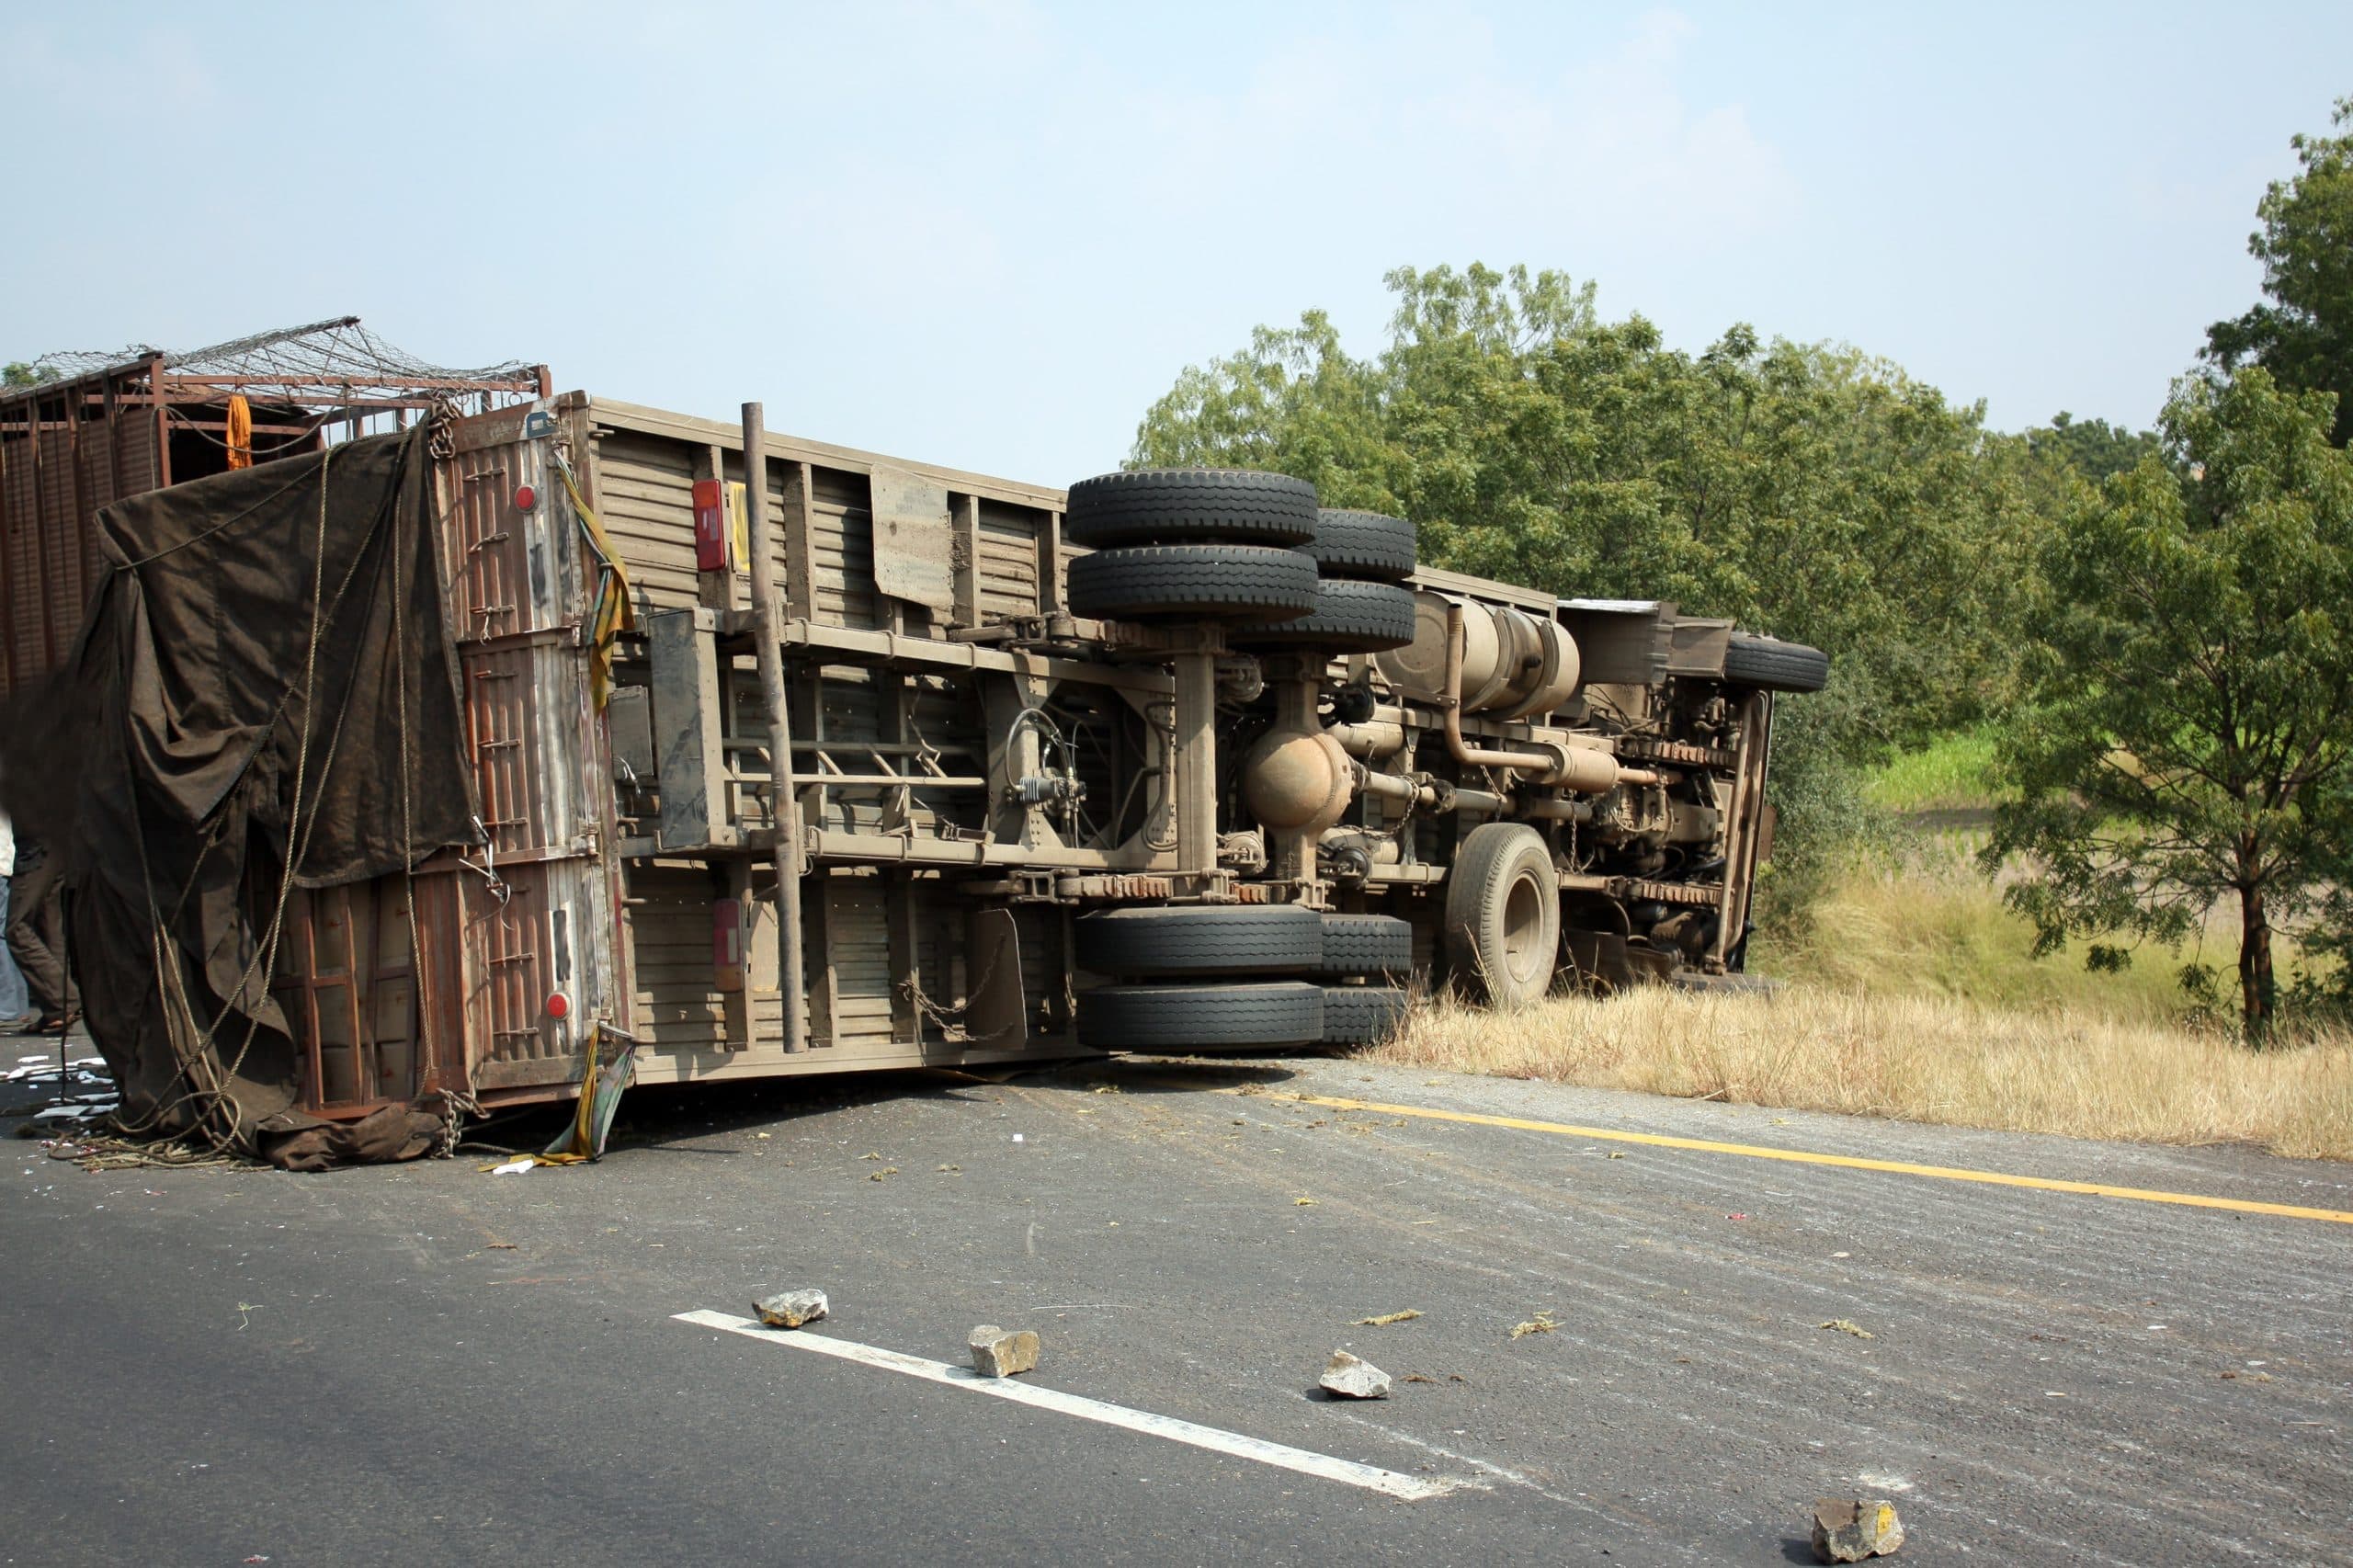 How to Get Compensation for Your Injuries in a Truck Accident